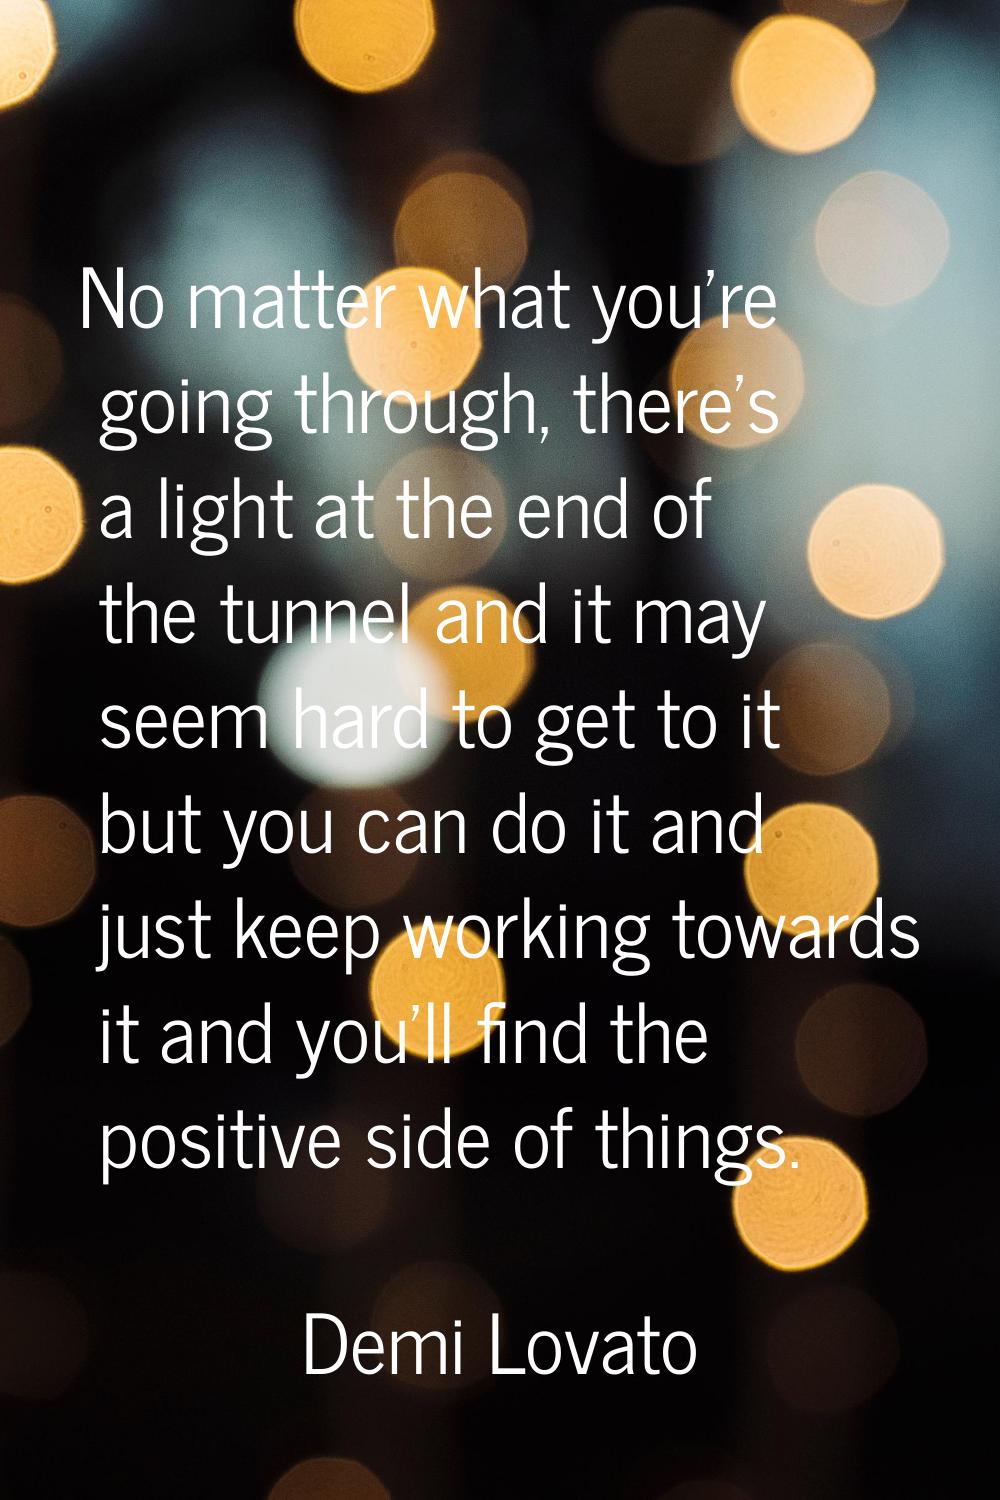 No matter what you're going through, there's a light at the end of the tunnel and it may seem hard 